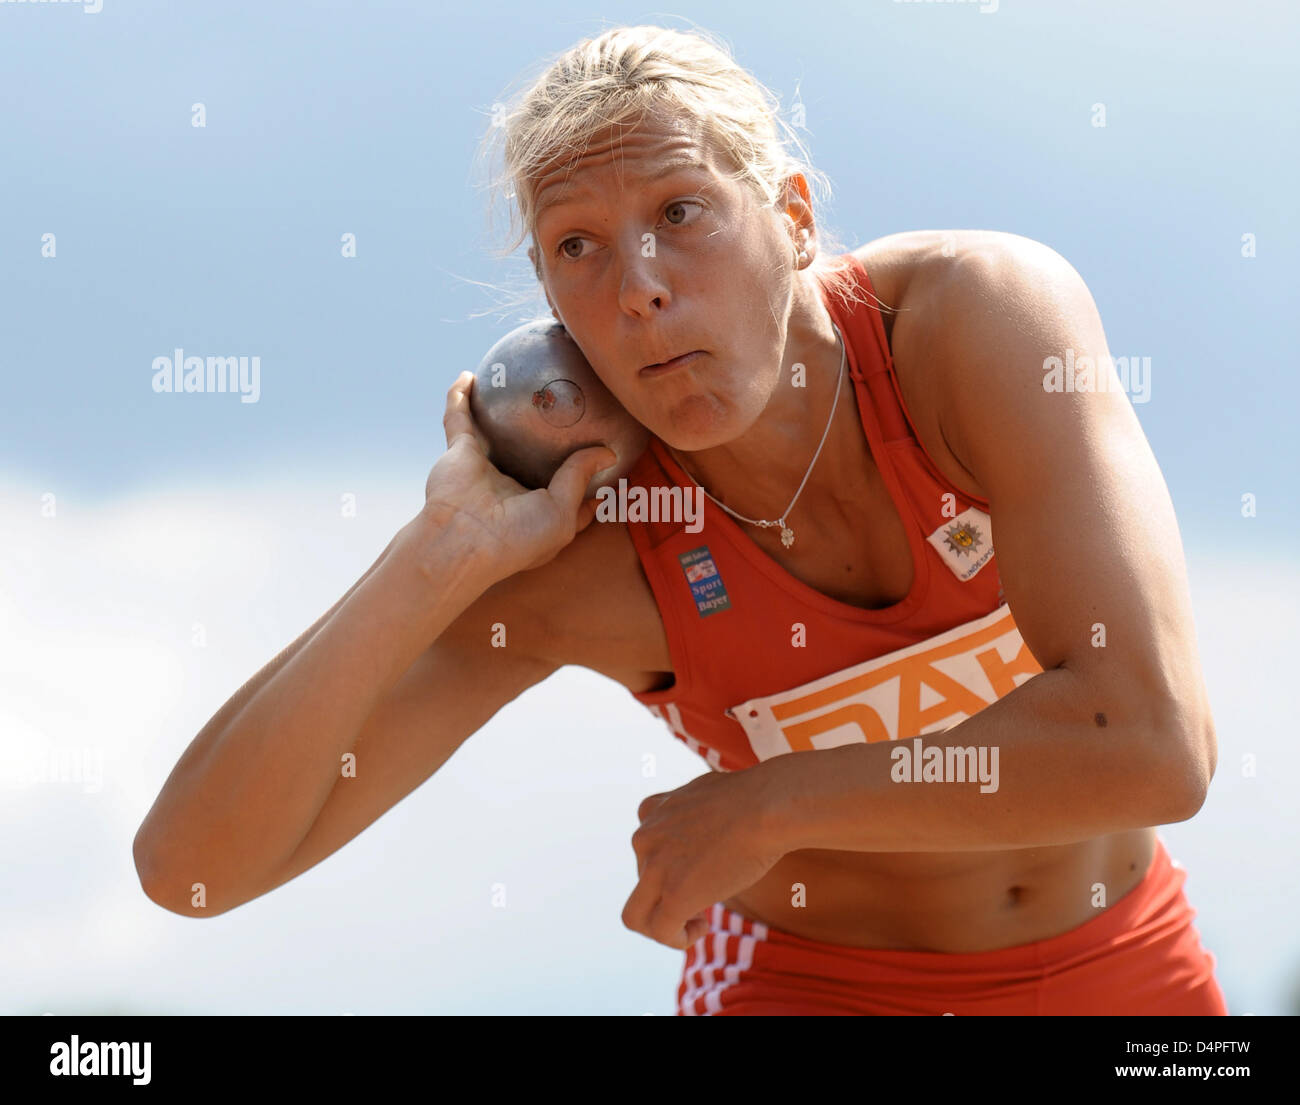 German heptathlete Jennifer Oeser competes in the shot-put at the German Combined Athletics Meeting in Ratingen, Germany, 20 June 2009. The two-day event is the last chance for Germany?s hept- and decathletes to qualify for the IAAF World Championships in Athletics. Photo: FRANZ-PETER TSCHAUNER Stock Photo